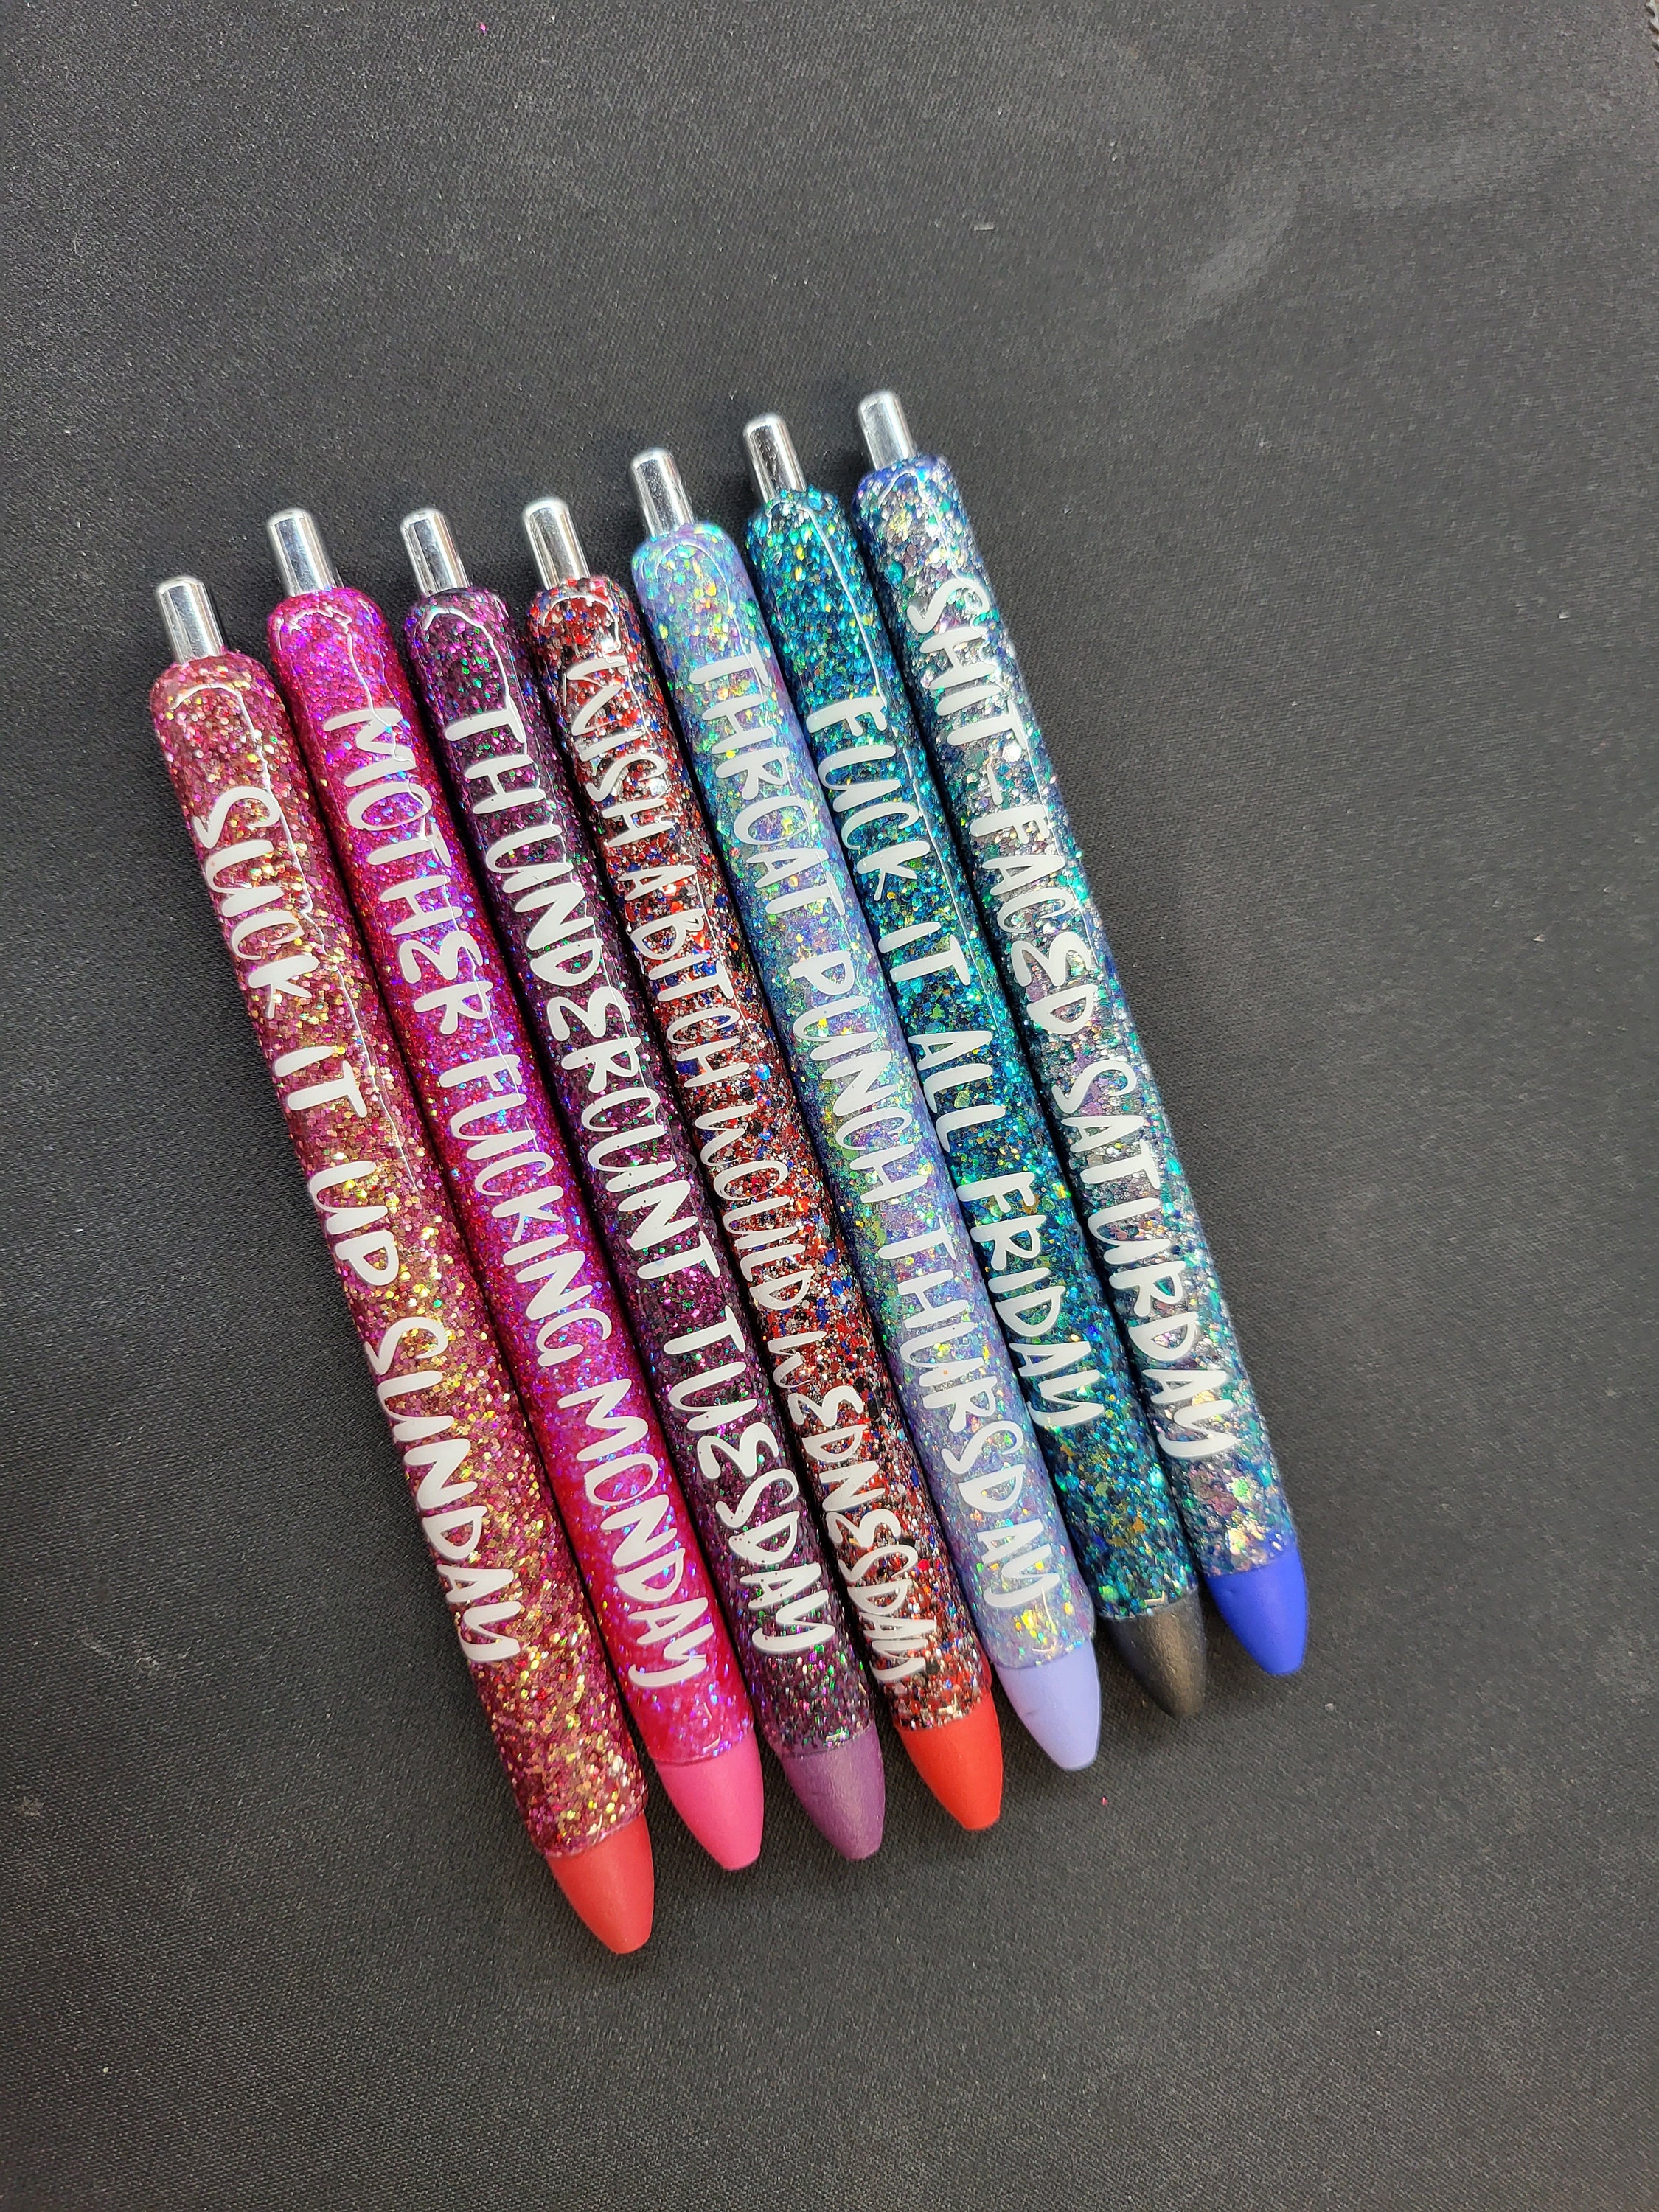 Pens for each day of the week … which day is your fav? #pens #gift